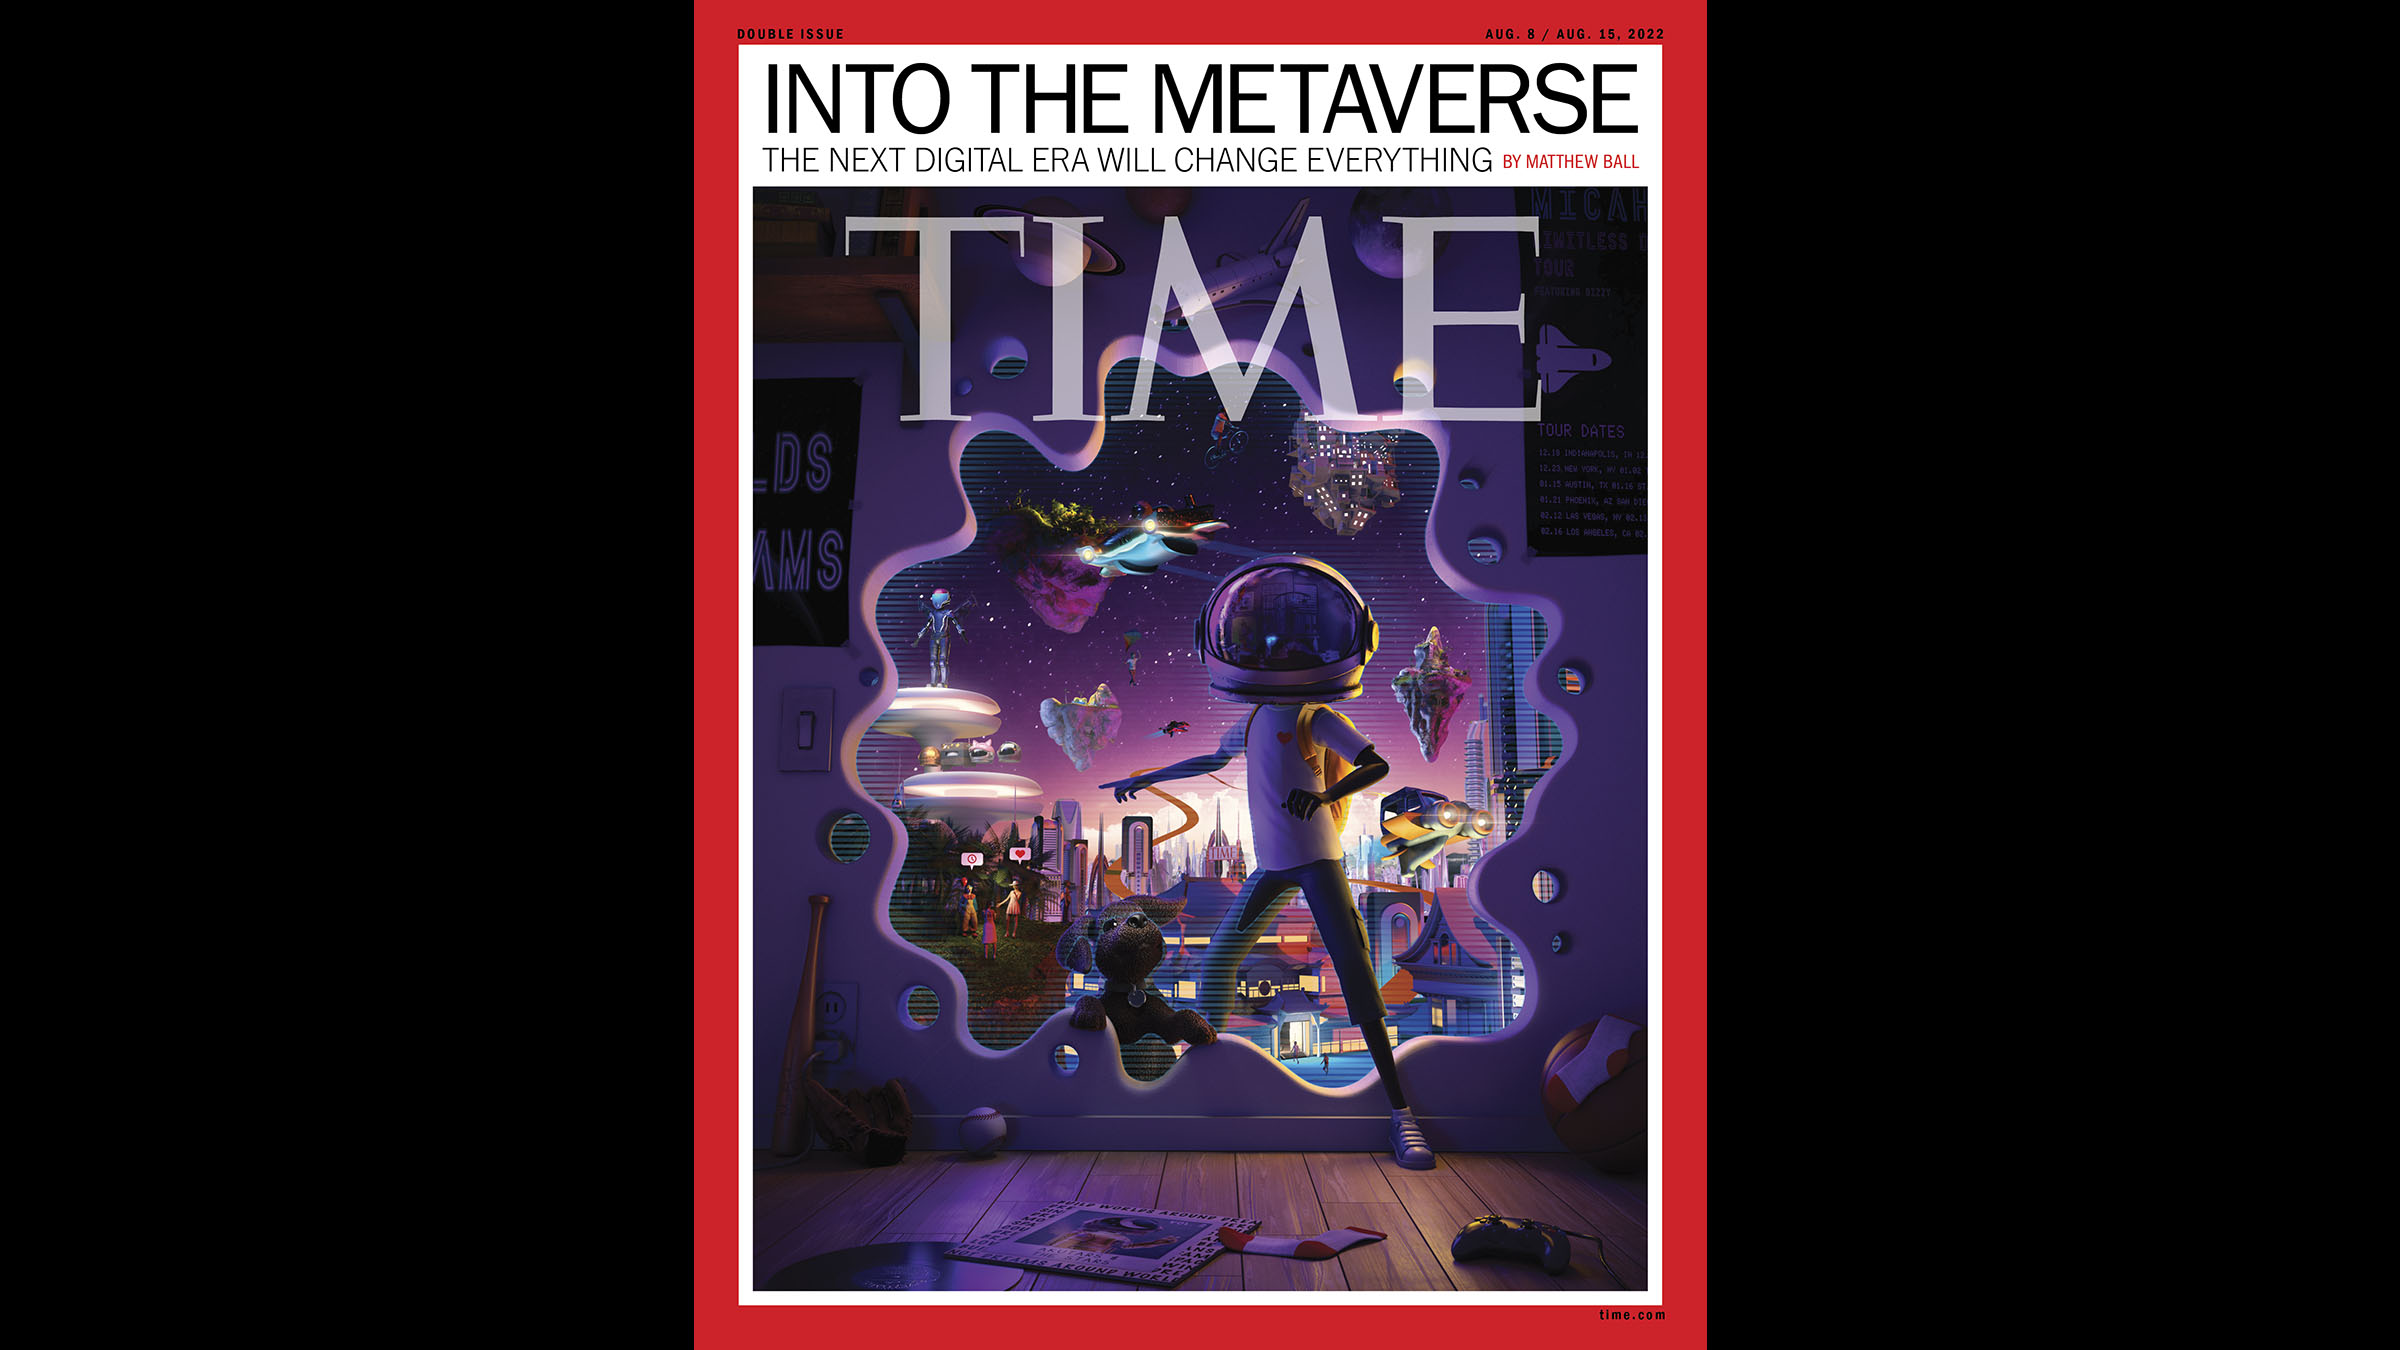 The Metaverse Will Reshape Our Lives. Let's Make Sure It's for the Better